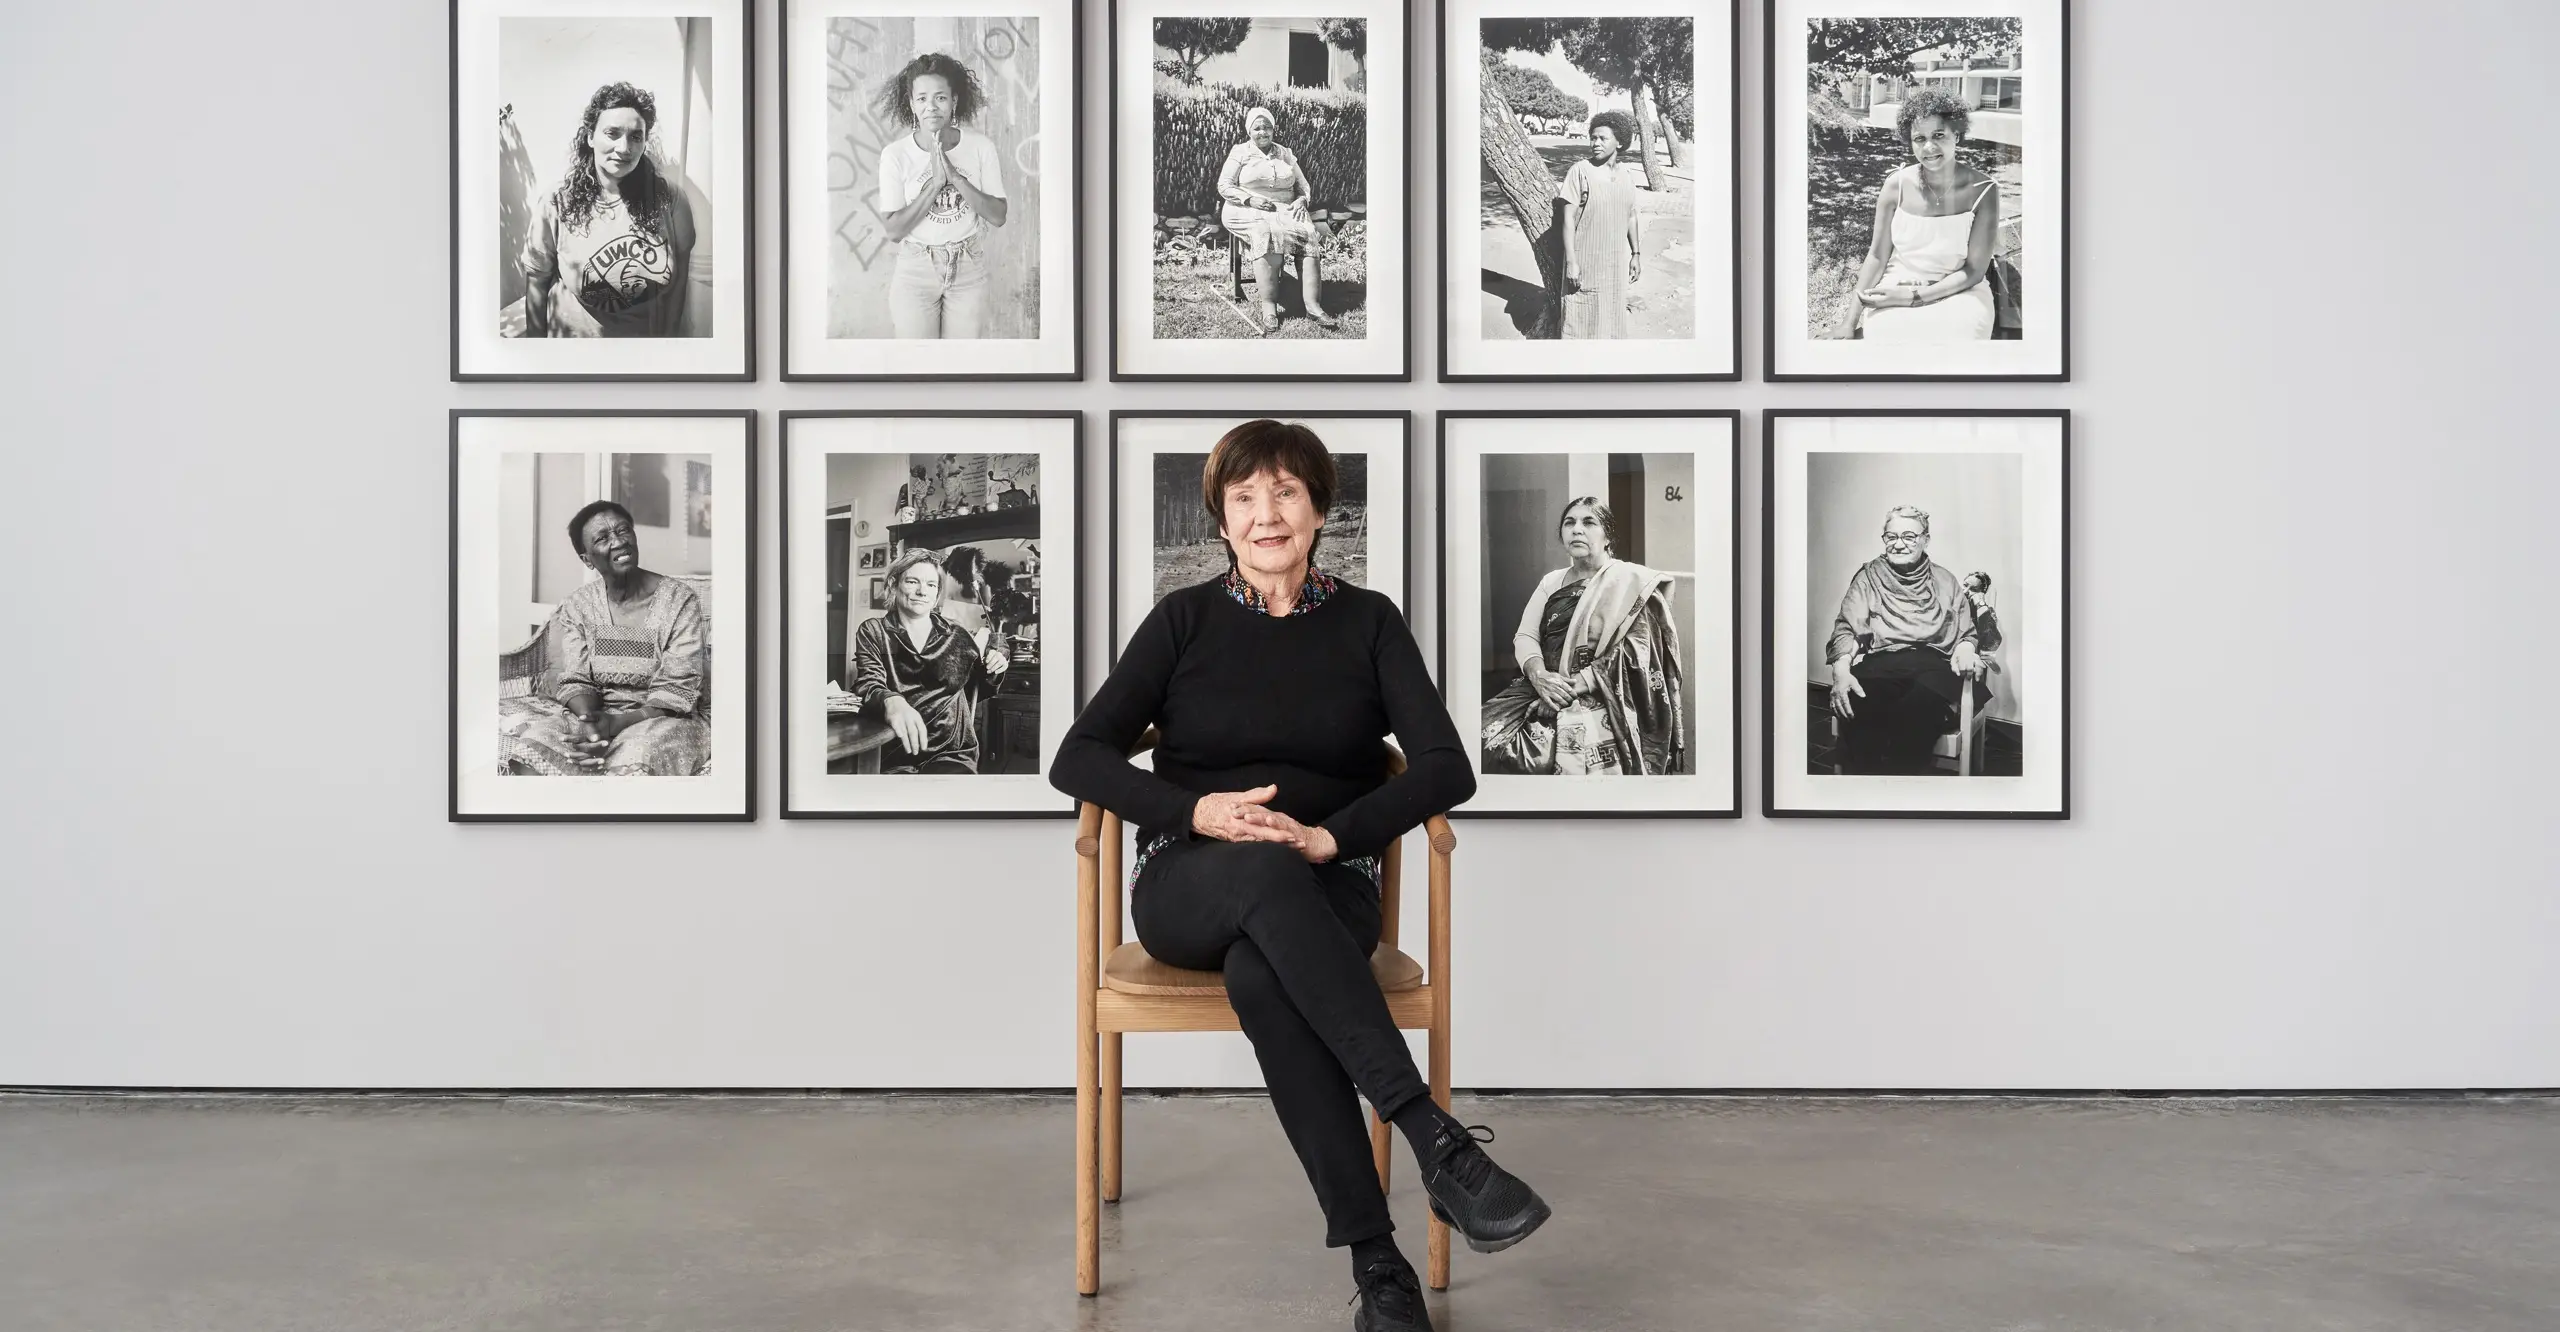 Portrait of the artist wearing all black, seated in front of an installation of 10 B&W images by the artist